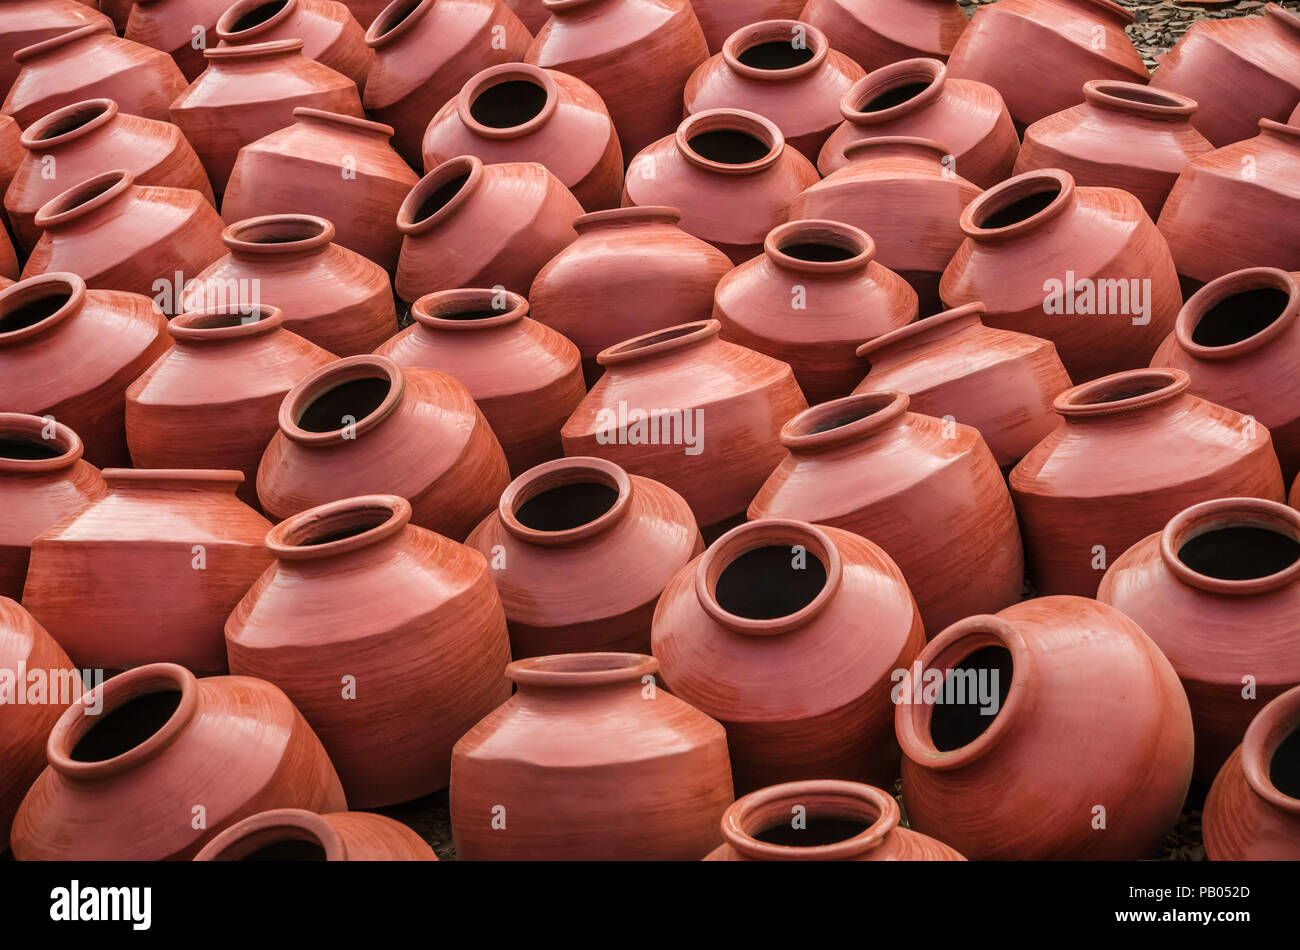 Collection of terracotta clay pots made from mud also known as Matka. Clay pots are used since ancient times and can be found in Indian subcontinent. Stock Photo